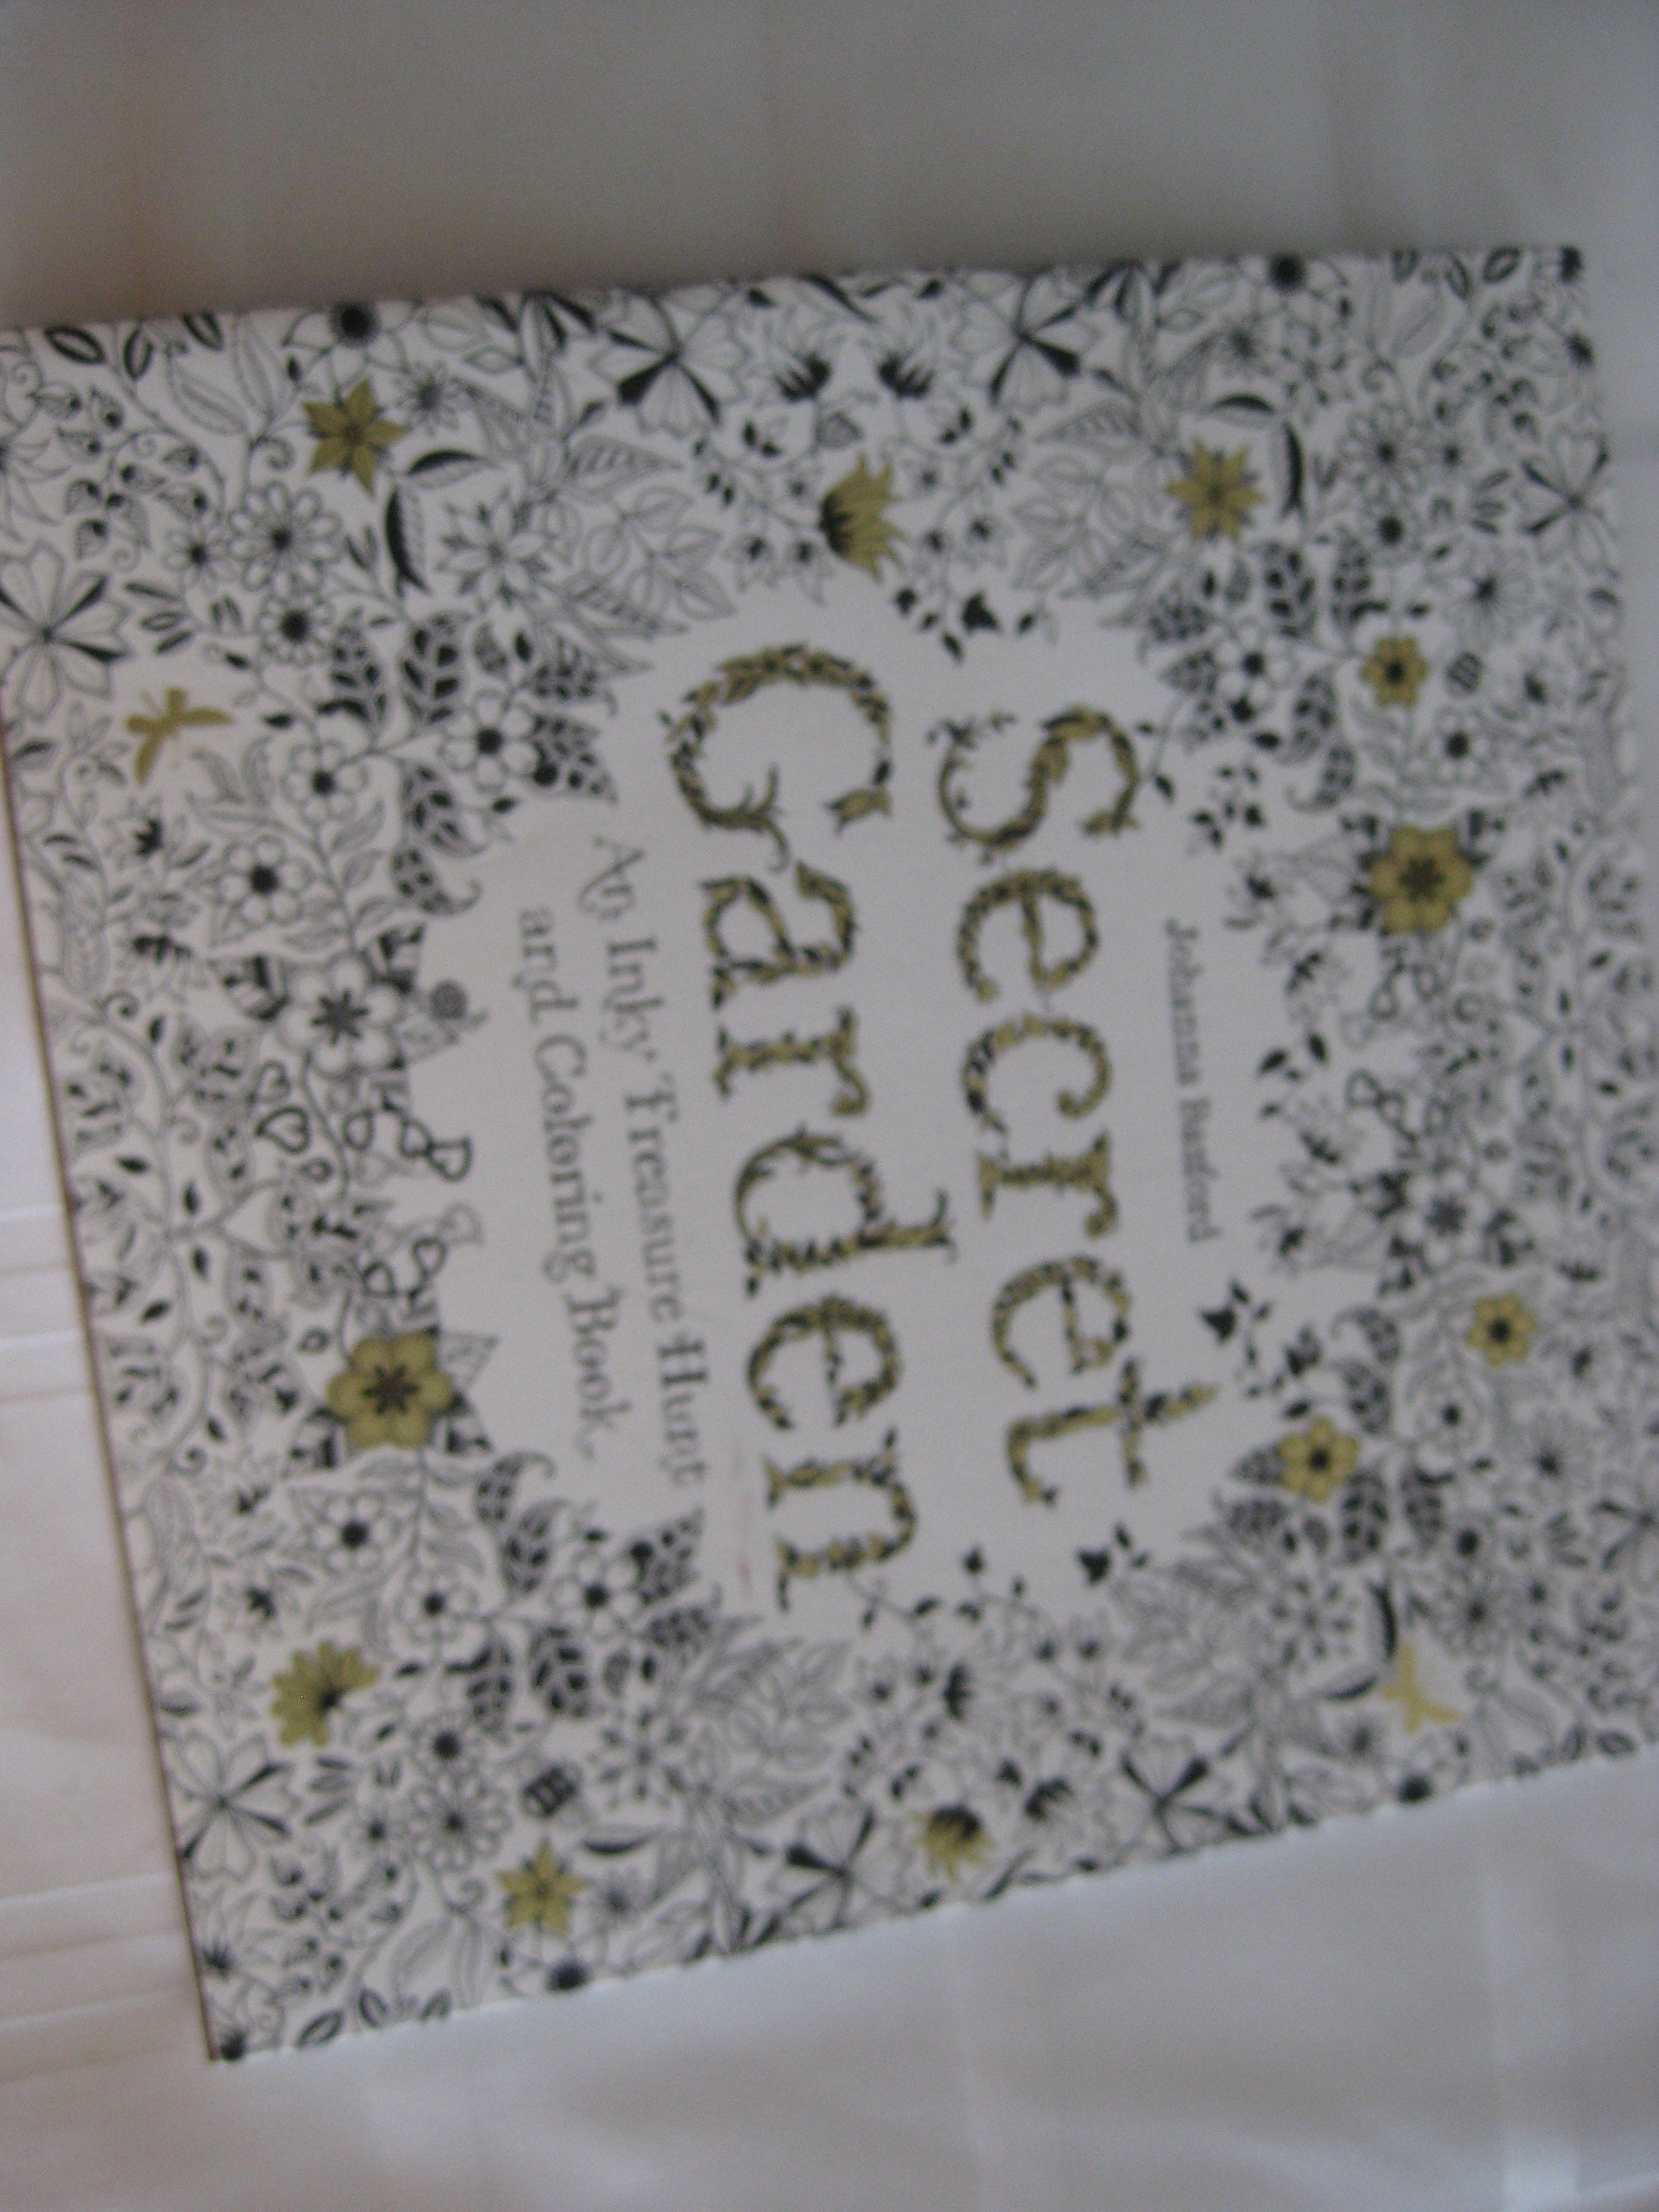 Secret Garden: An Inky Treasure Hunt and Coloring Book (For Adults